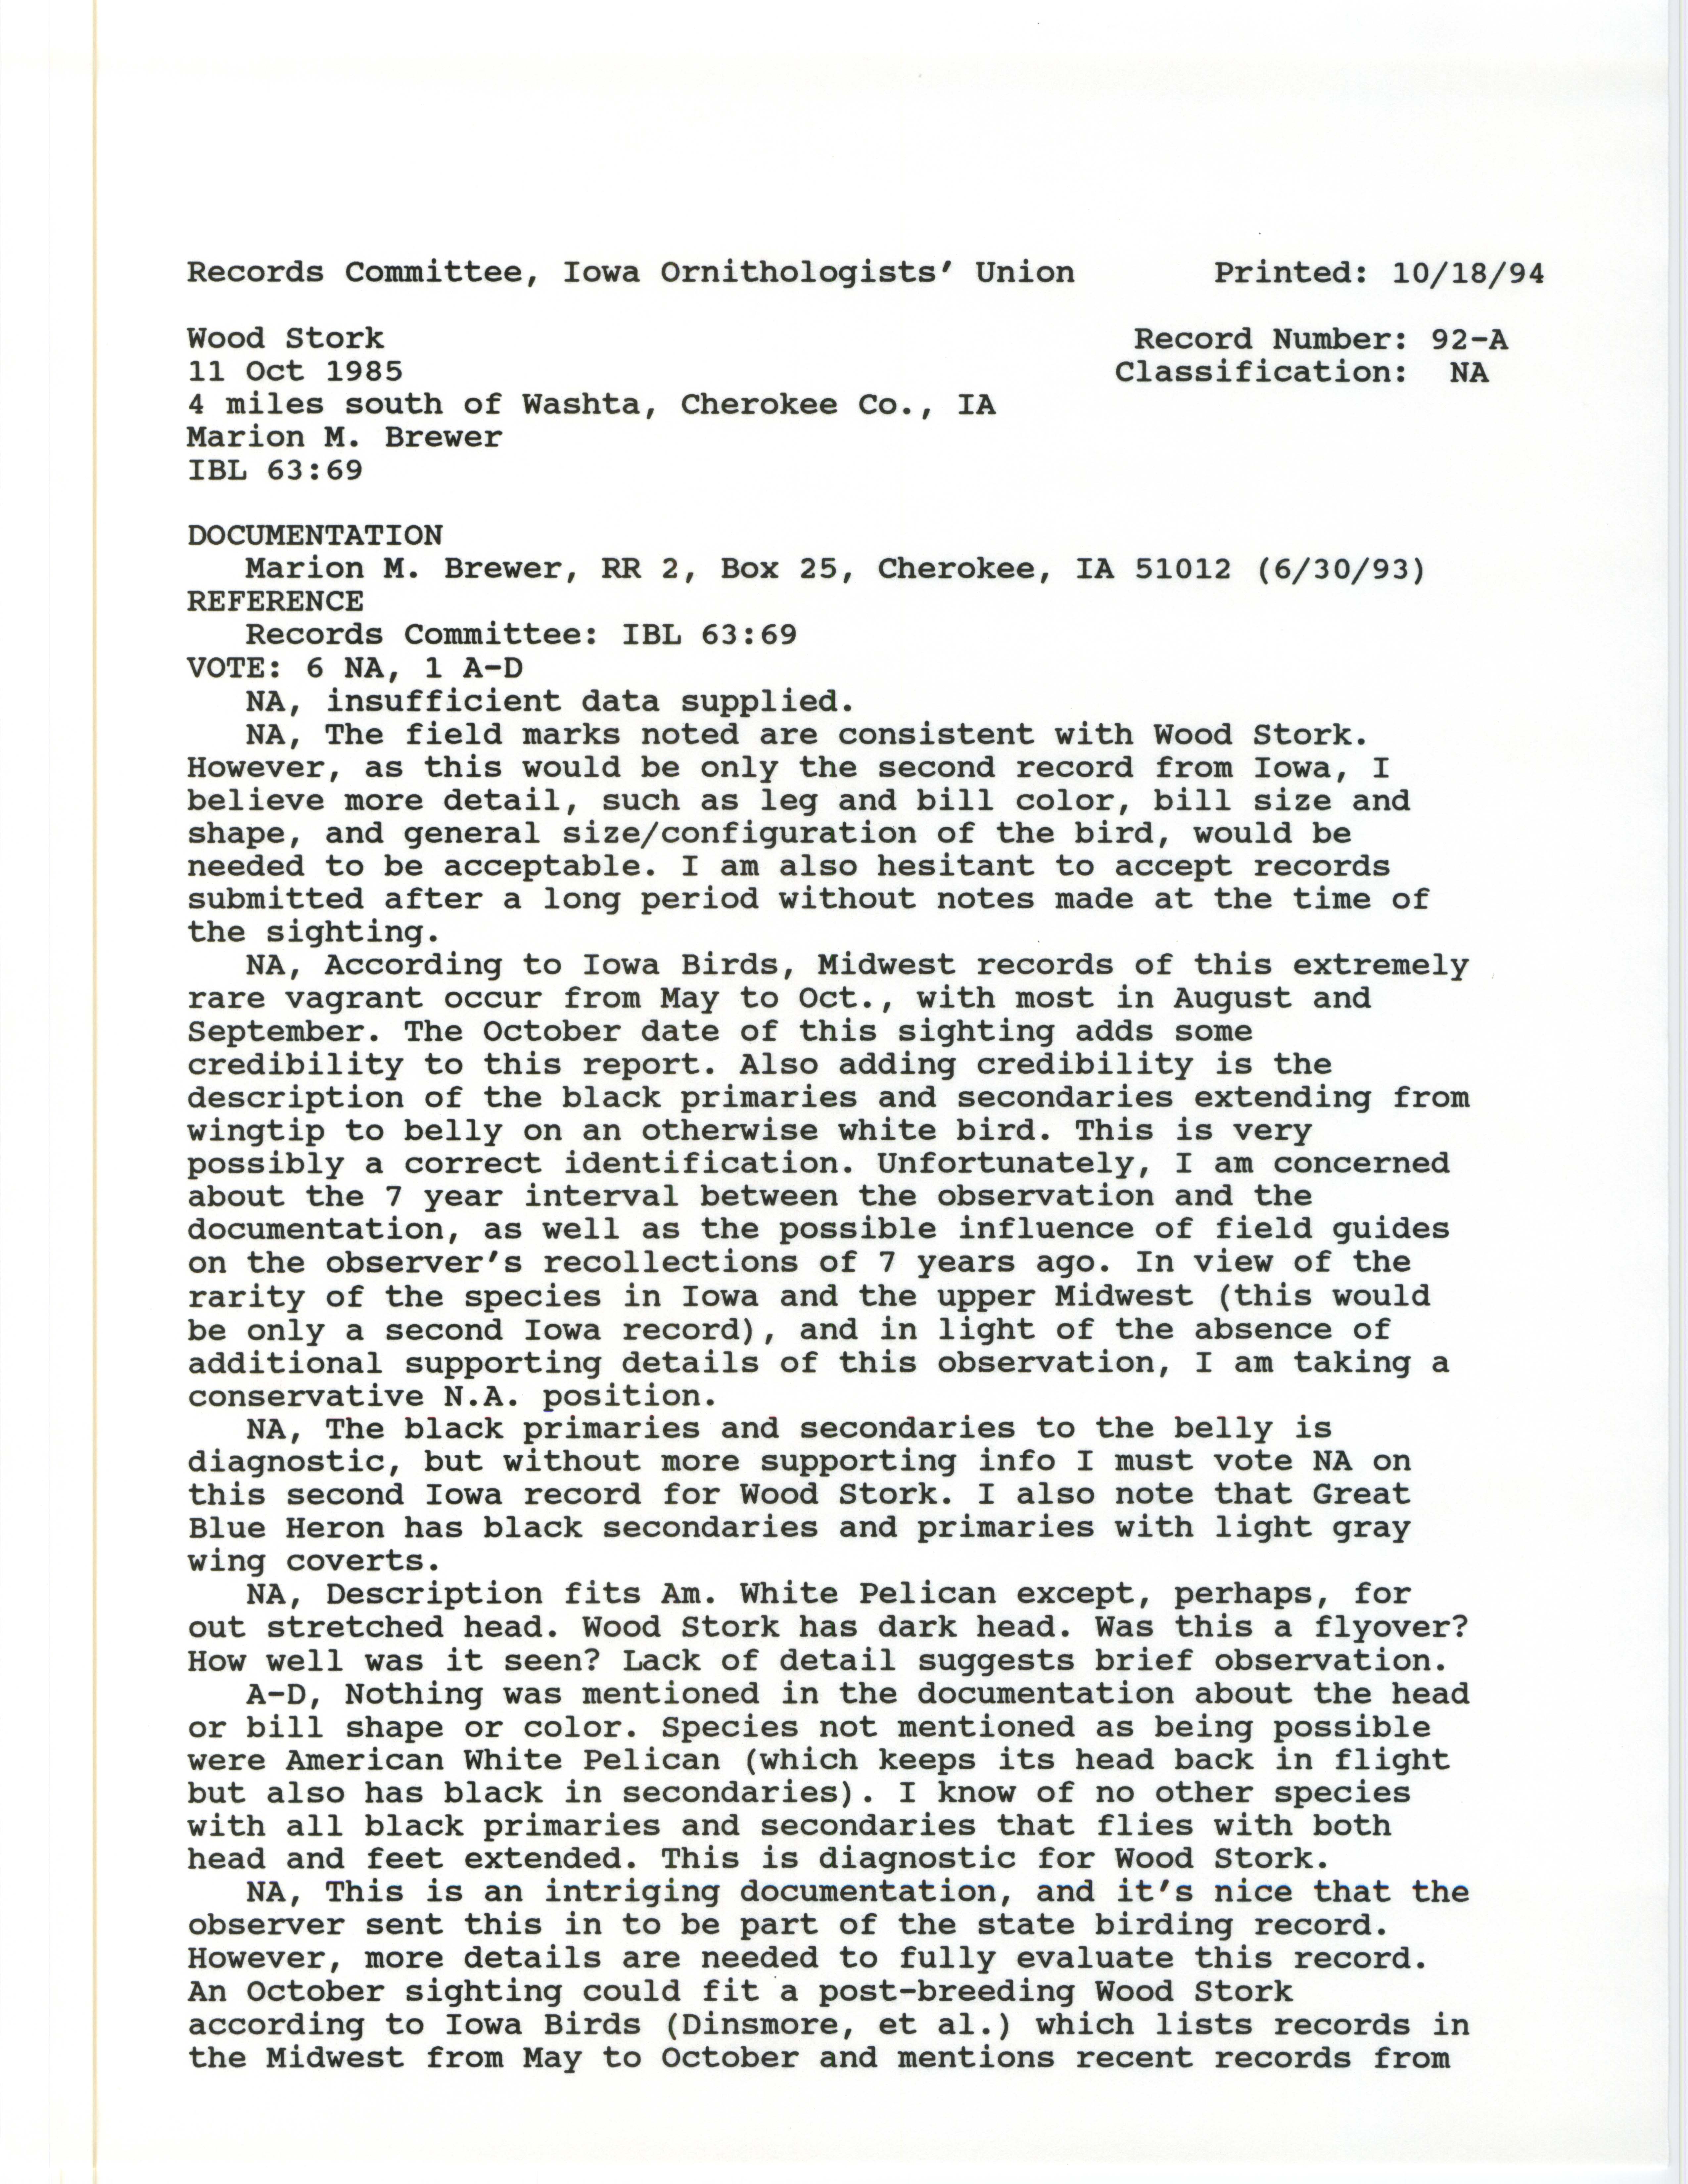 Records Committee review for rare bird sighting of Wood Stork at Washta, 1985